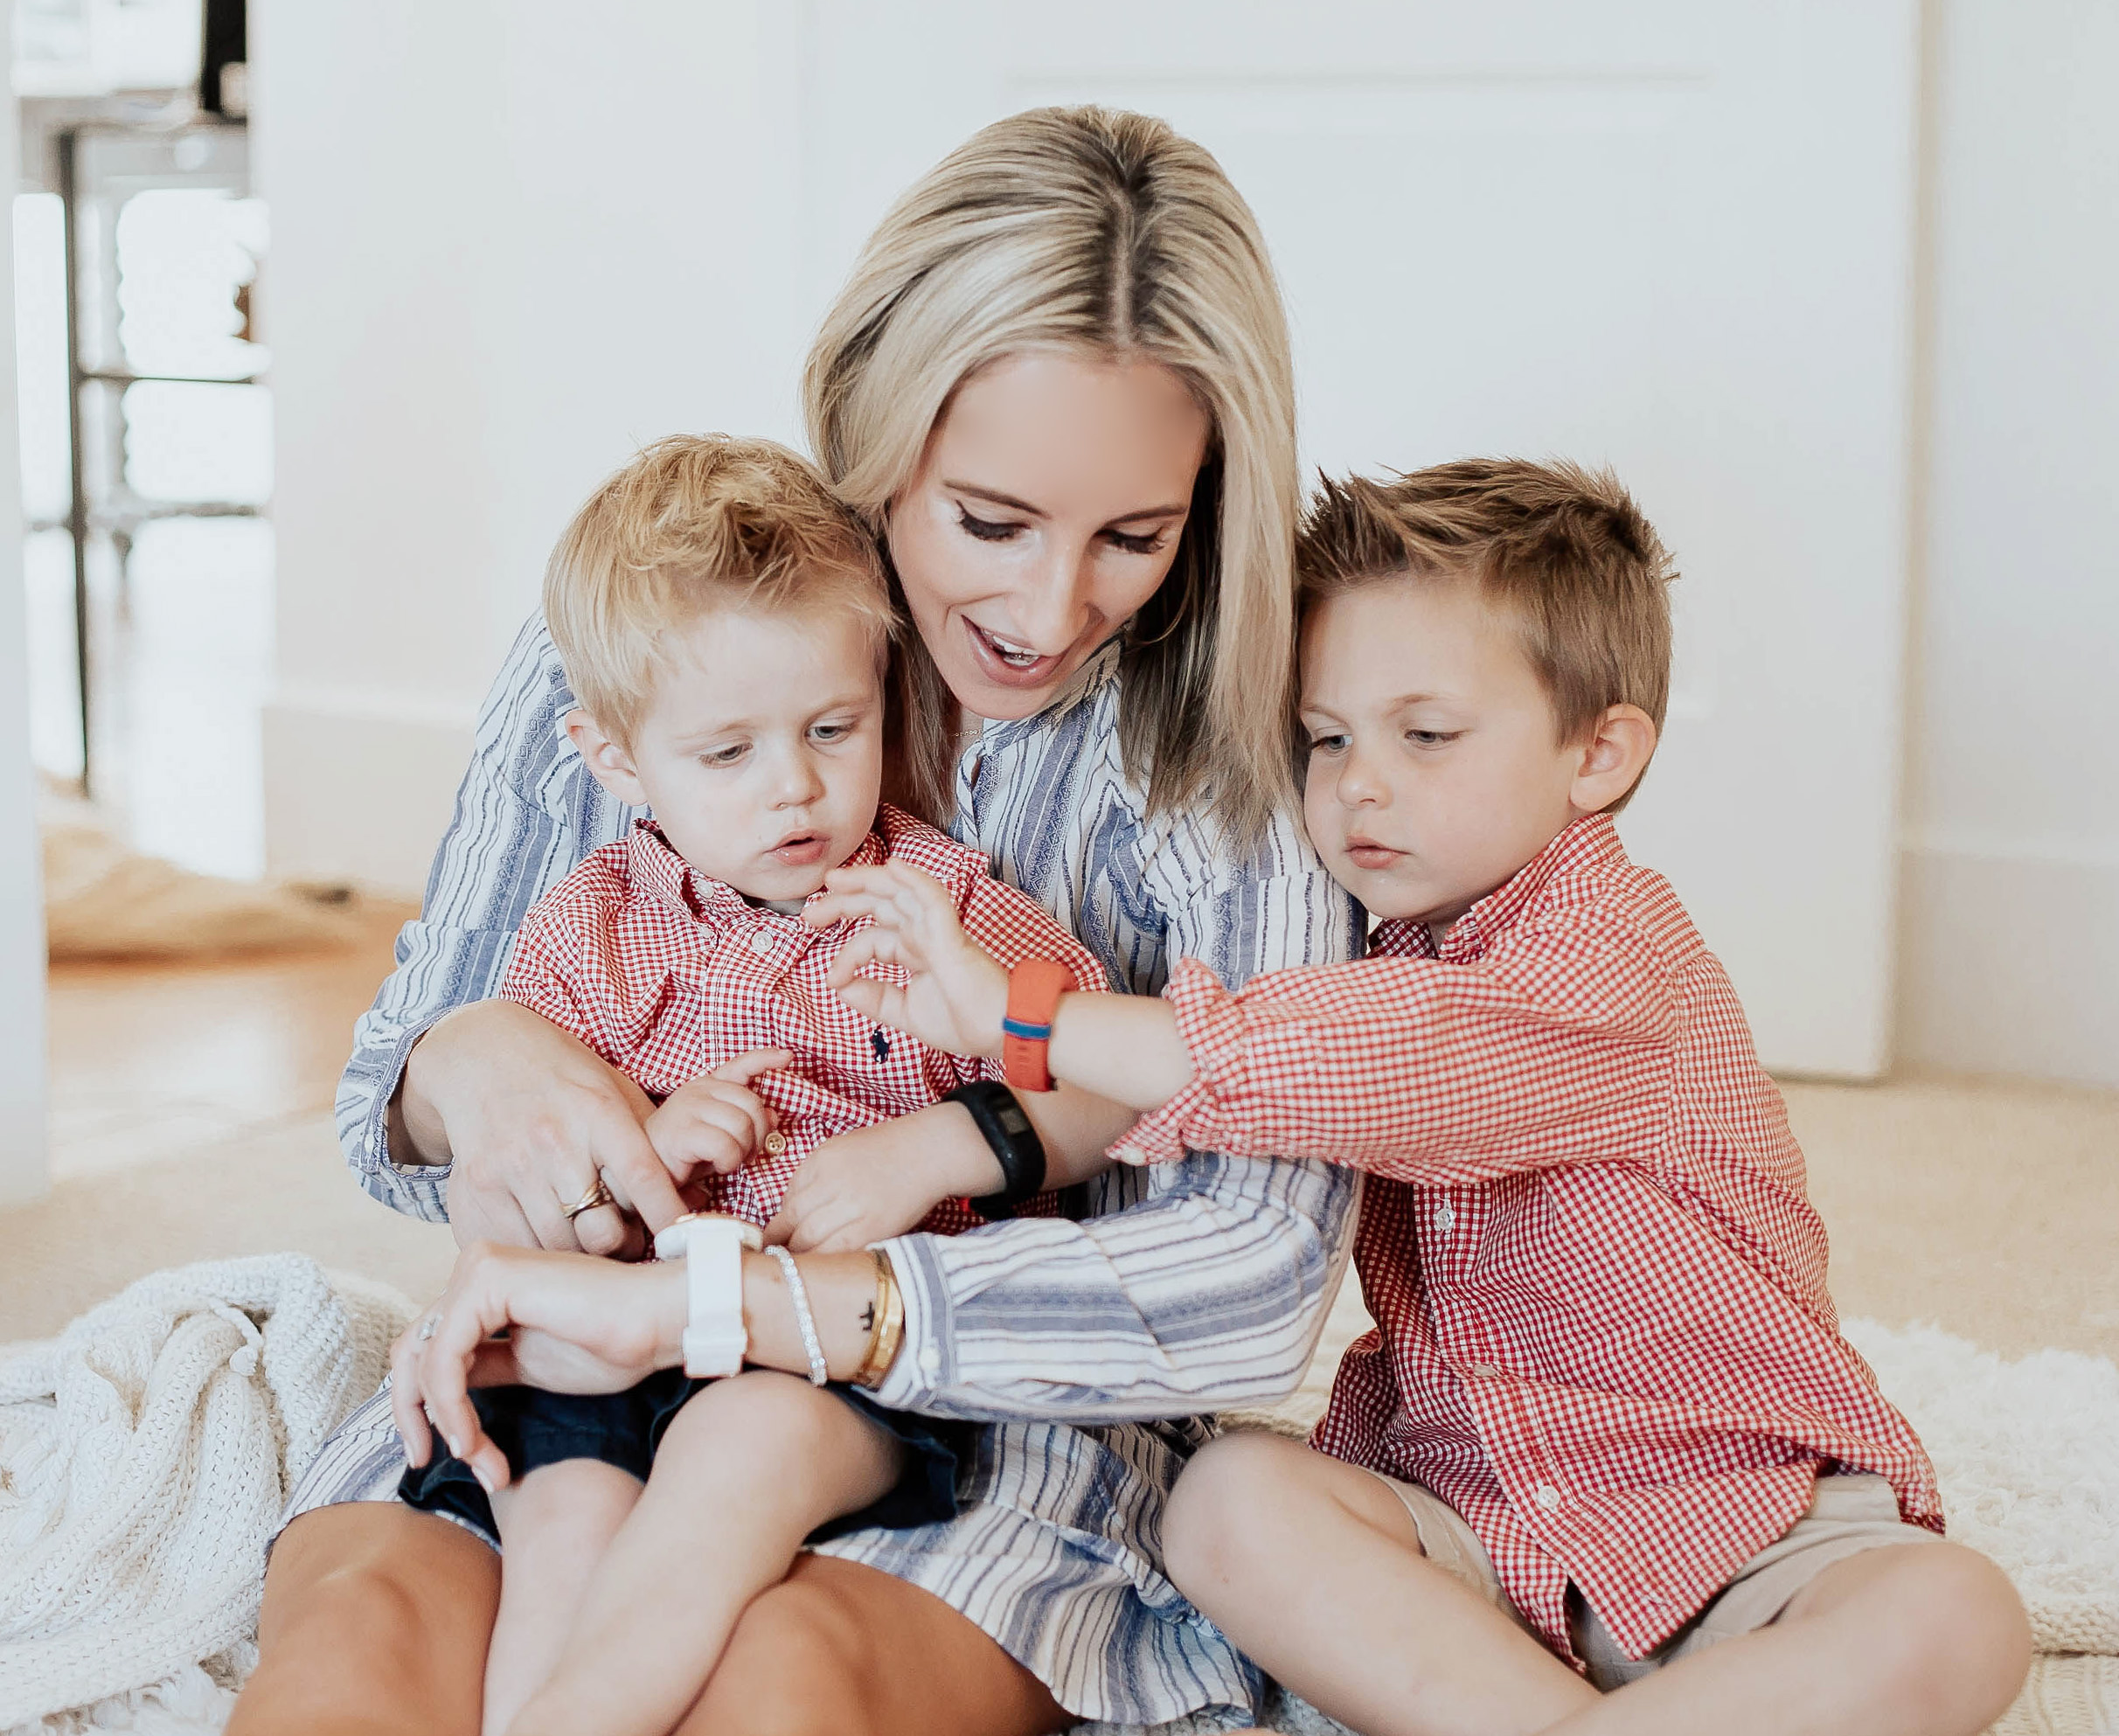 Reno, Nevada Blogger Emily Farren Wieczorek talks about her favorite gift for moms this Mother's Day - The Garmin VivimoveHR !